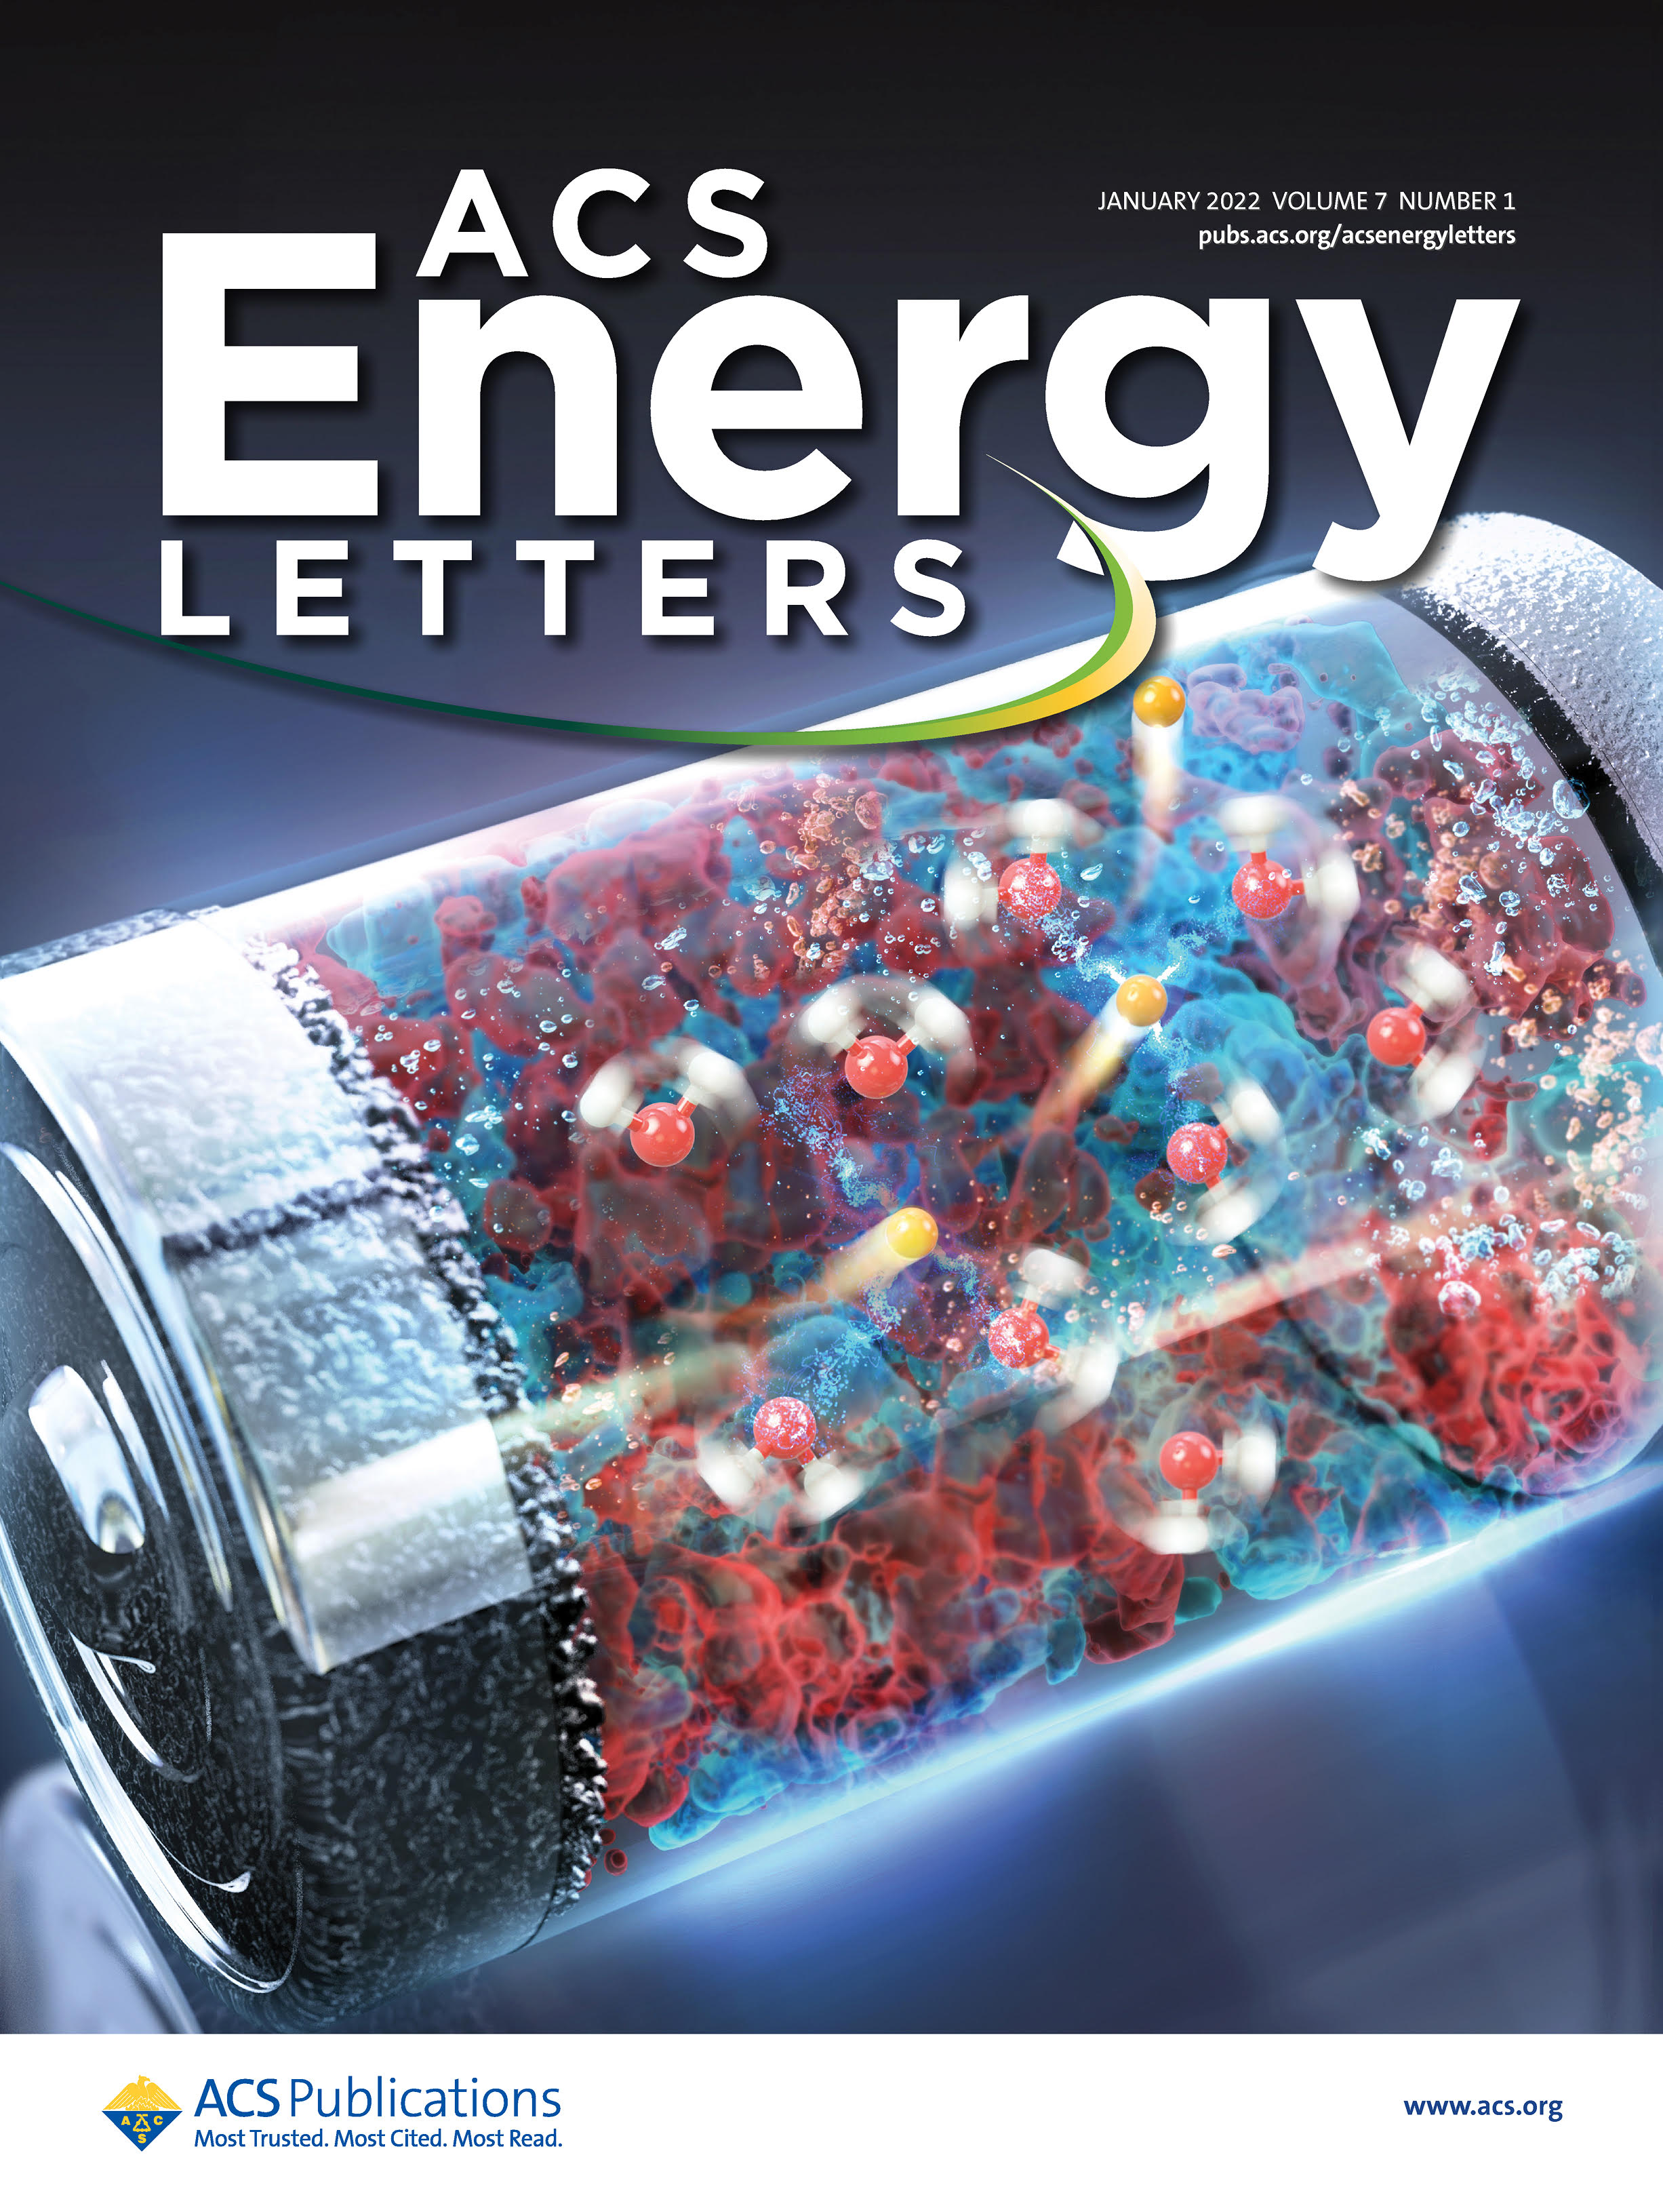 Selected as a Supplementary Cover for 'ACS Energy Letters'!